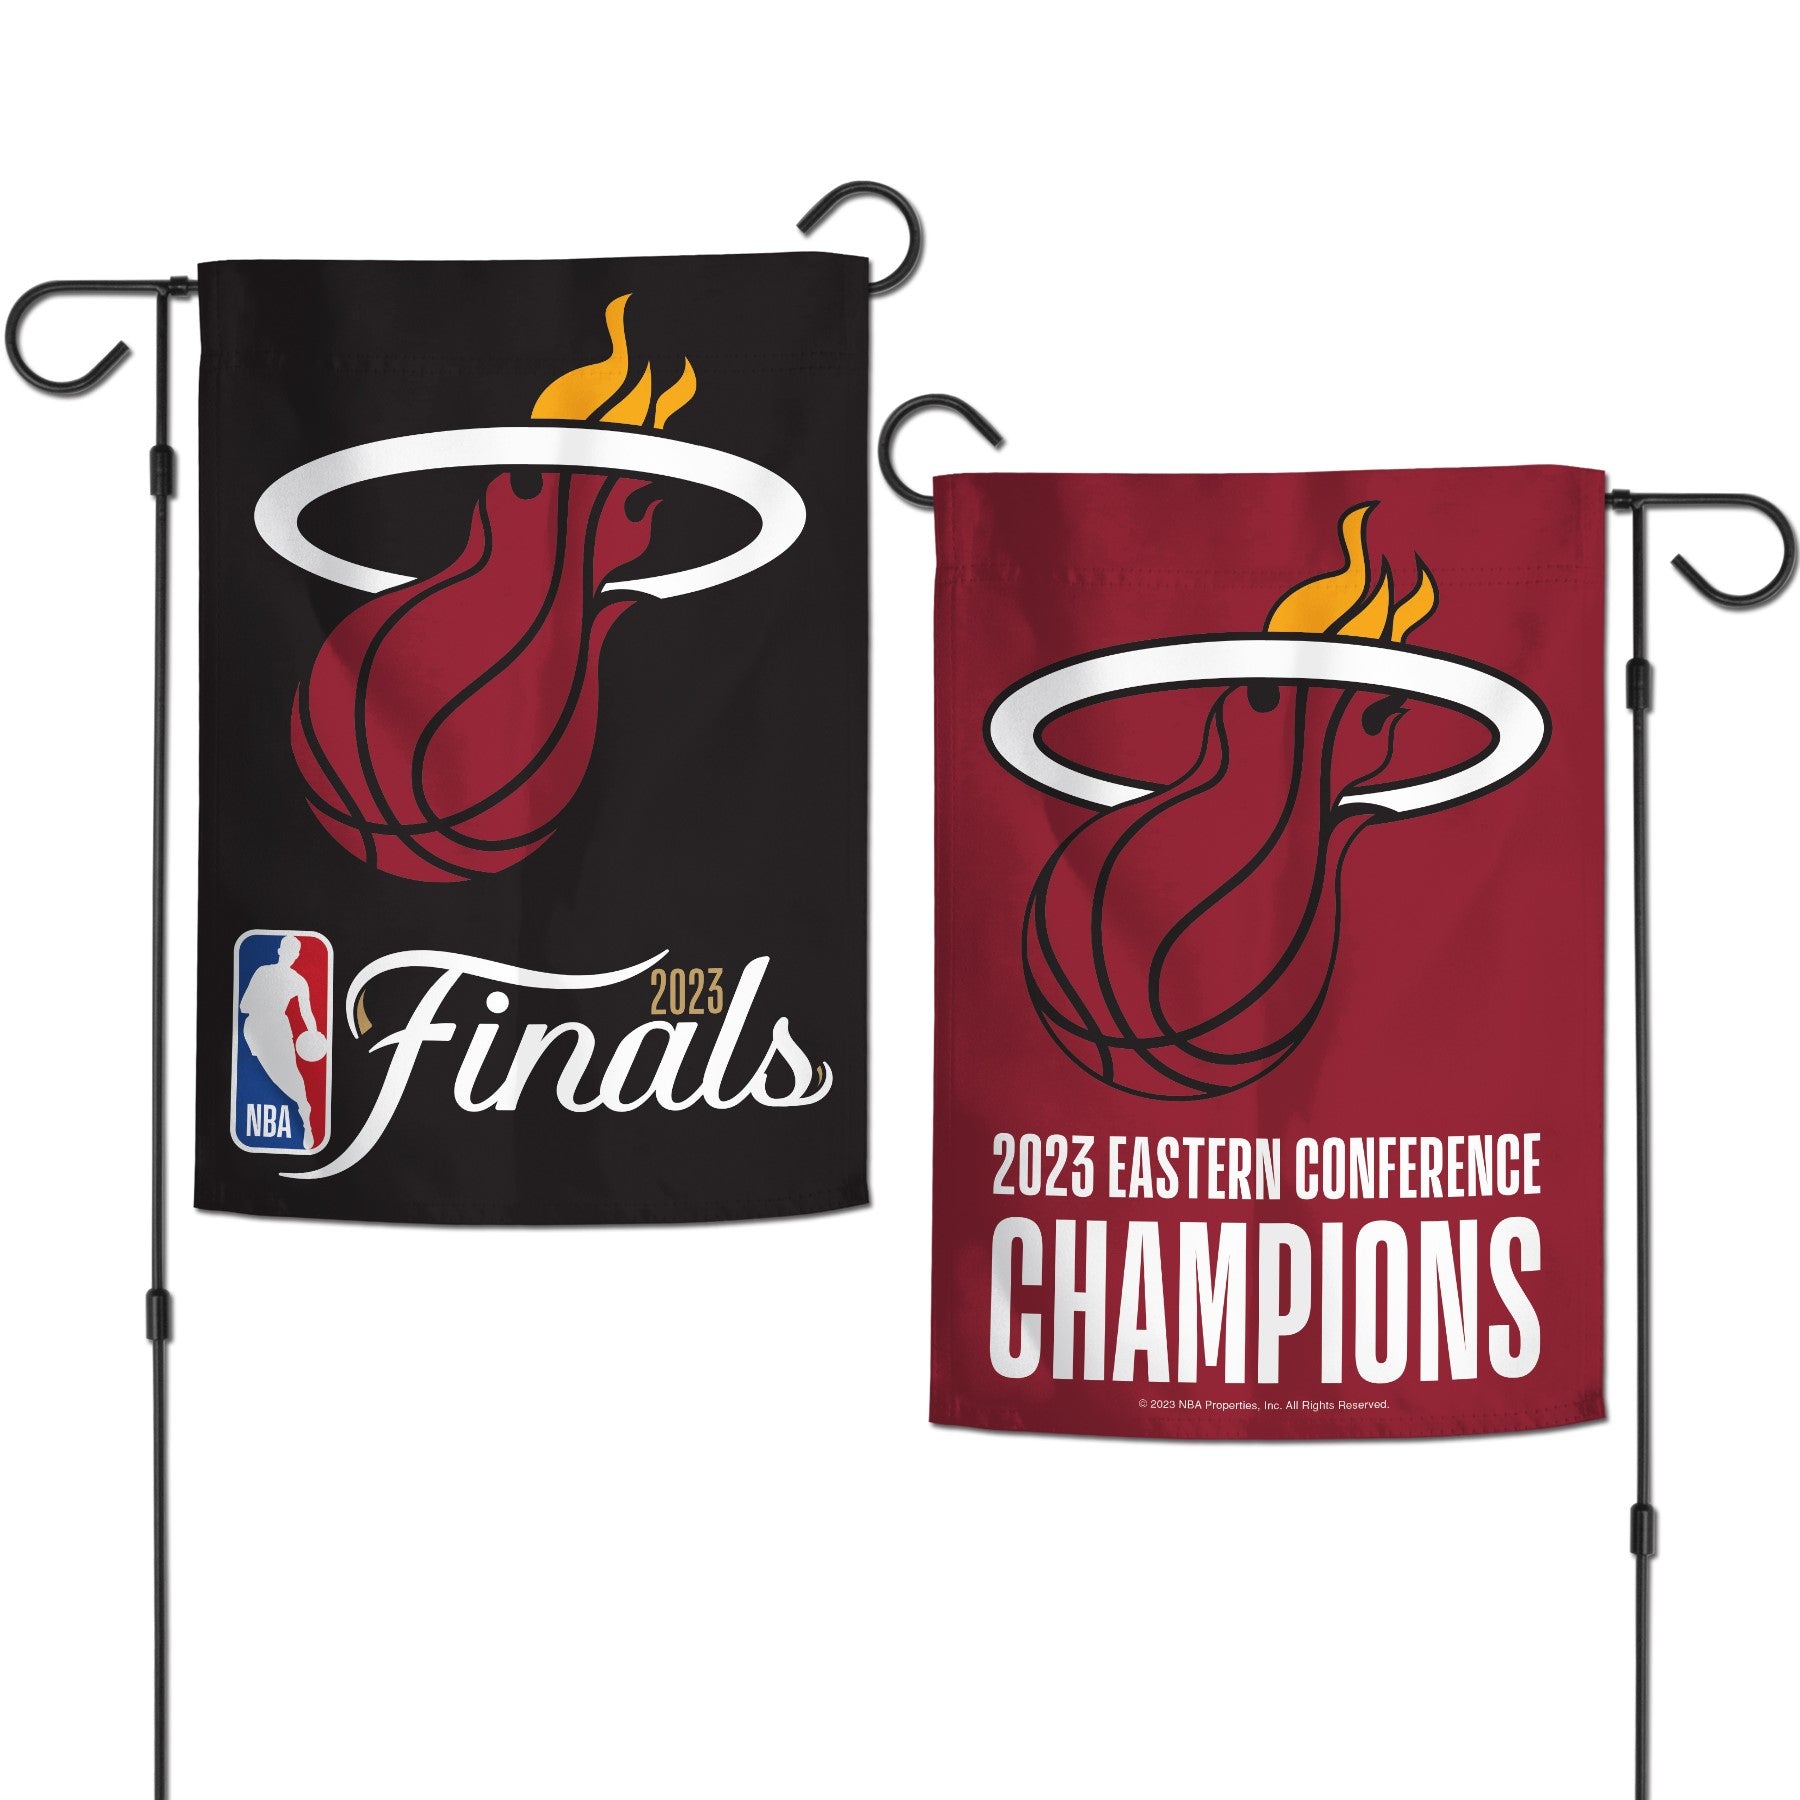 Miami Heat 2023 Eastern Conference Champions Garden Flag - 12.5" x 18"